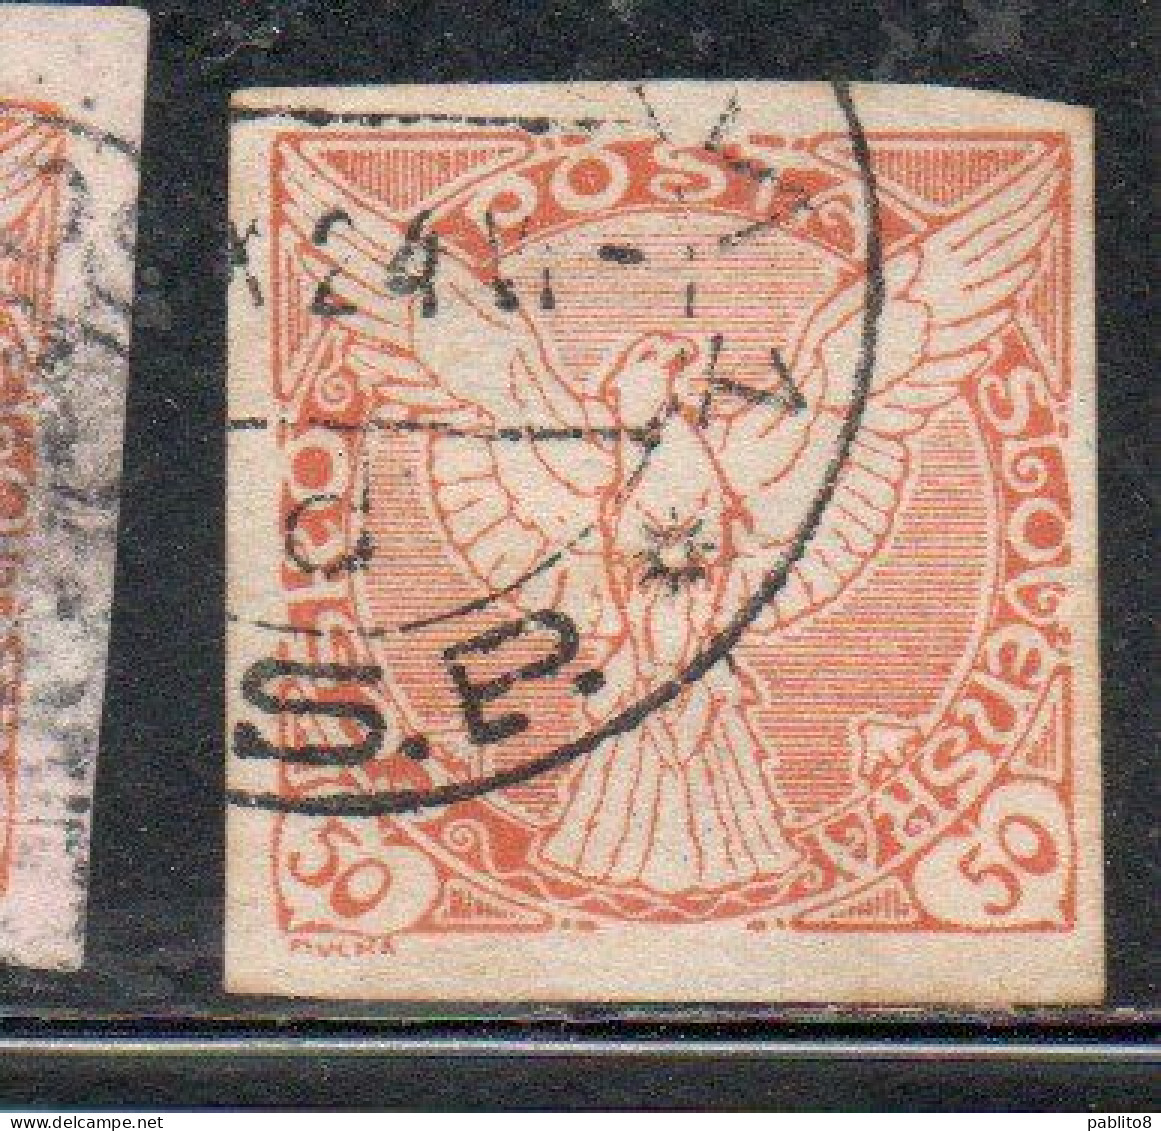 CZECHOSLOVAKIA CESKA CECOSLOVACCHIA 1918 1920 IMPERF. NEWSPAPER STAMPS WINDHOVER 50h USED USATO OBLITERE' - Timbres Pour Journaux